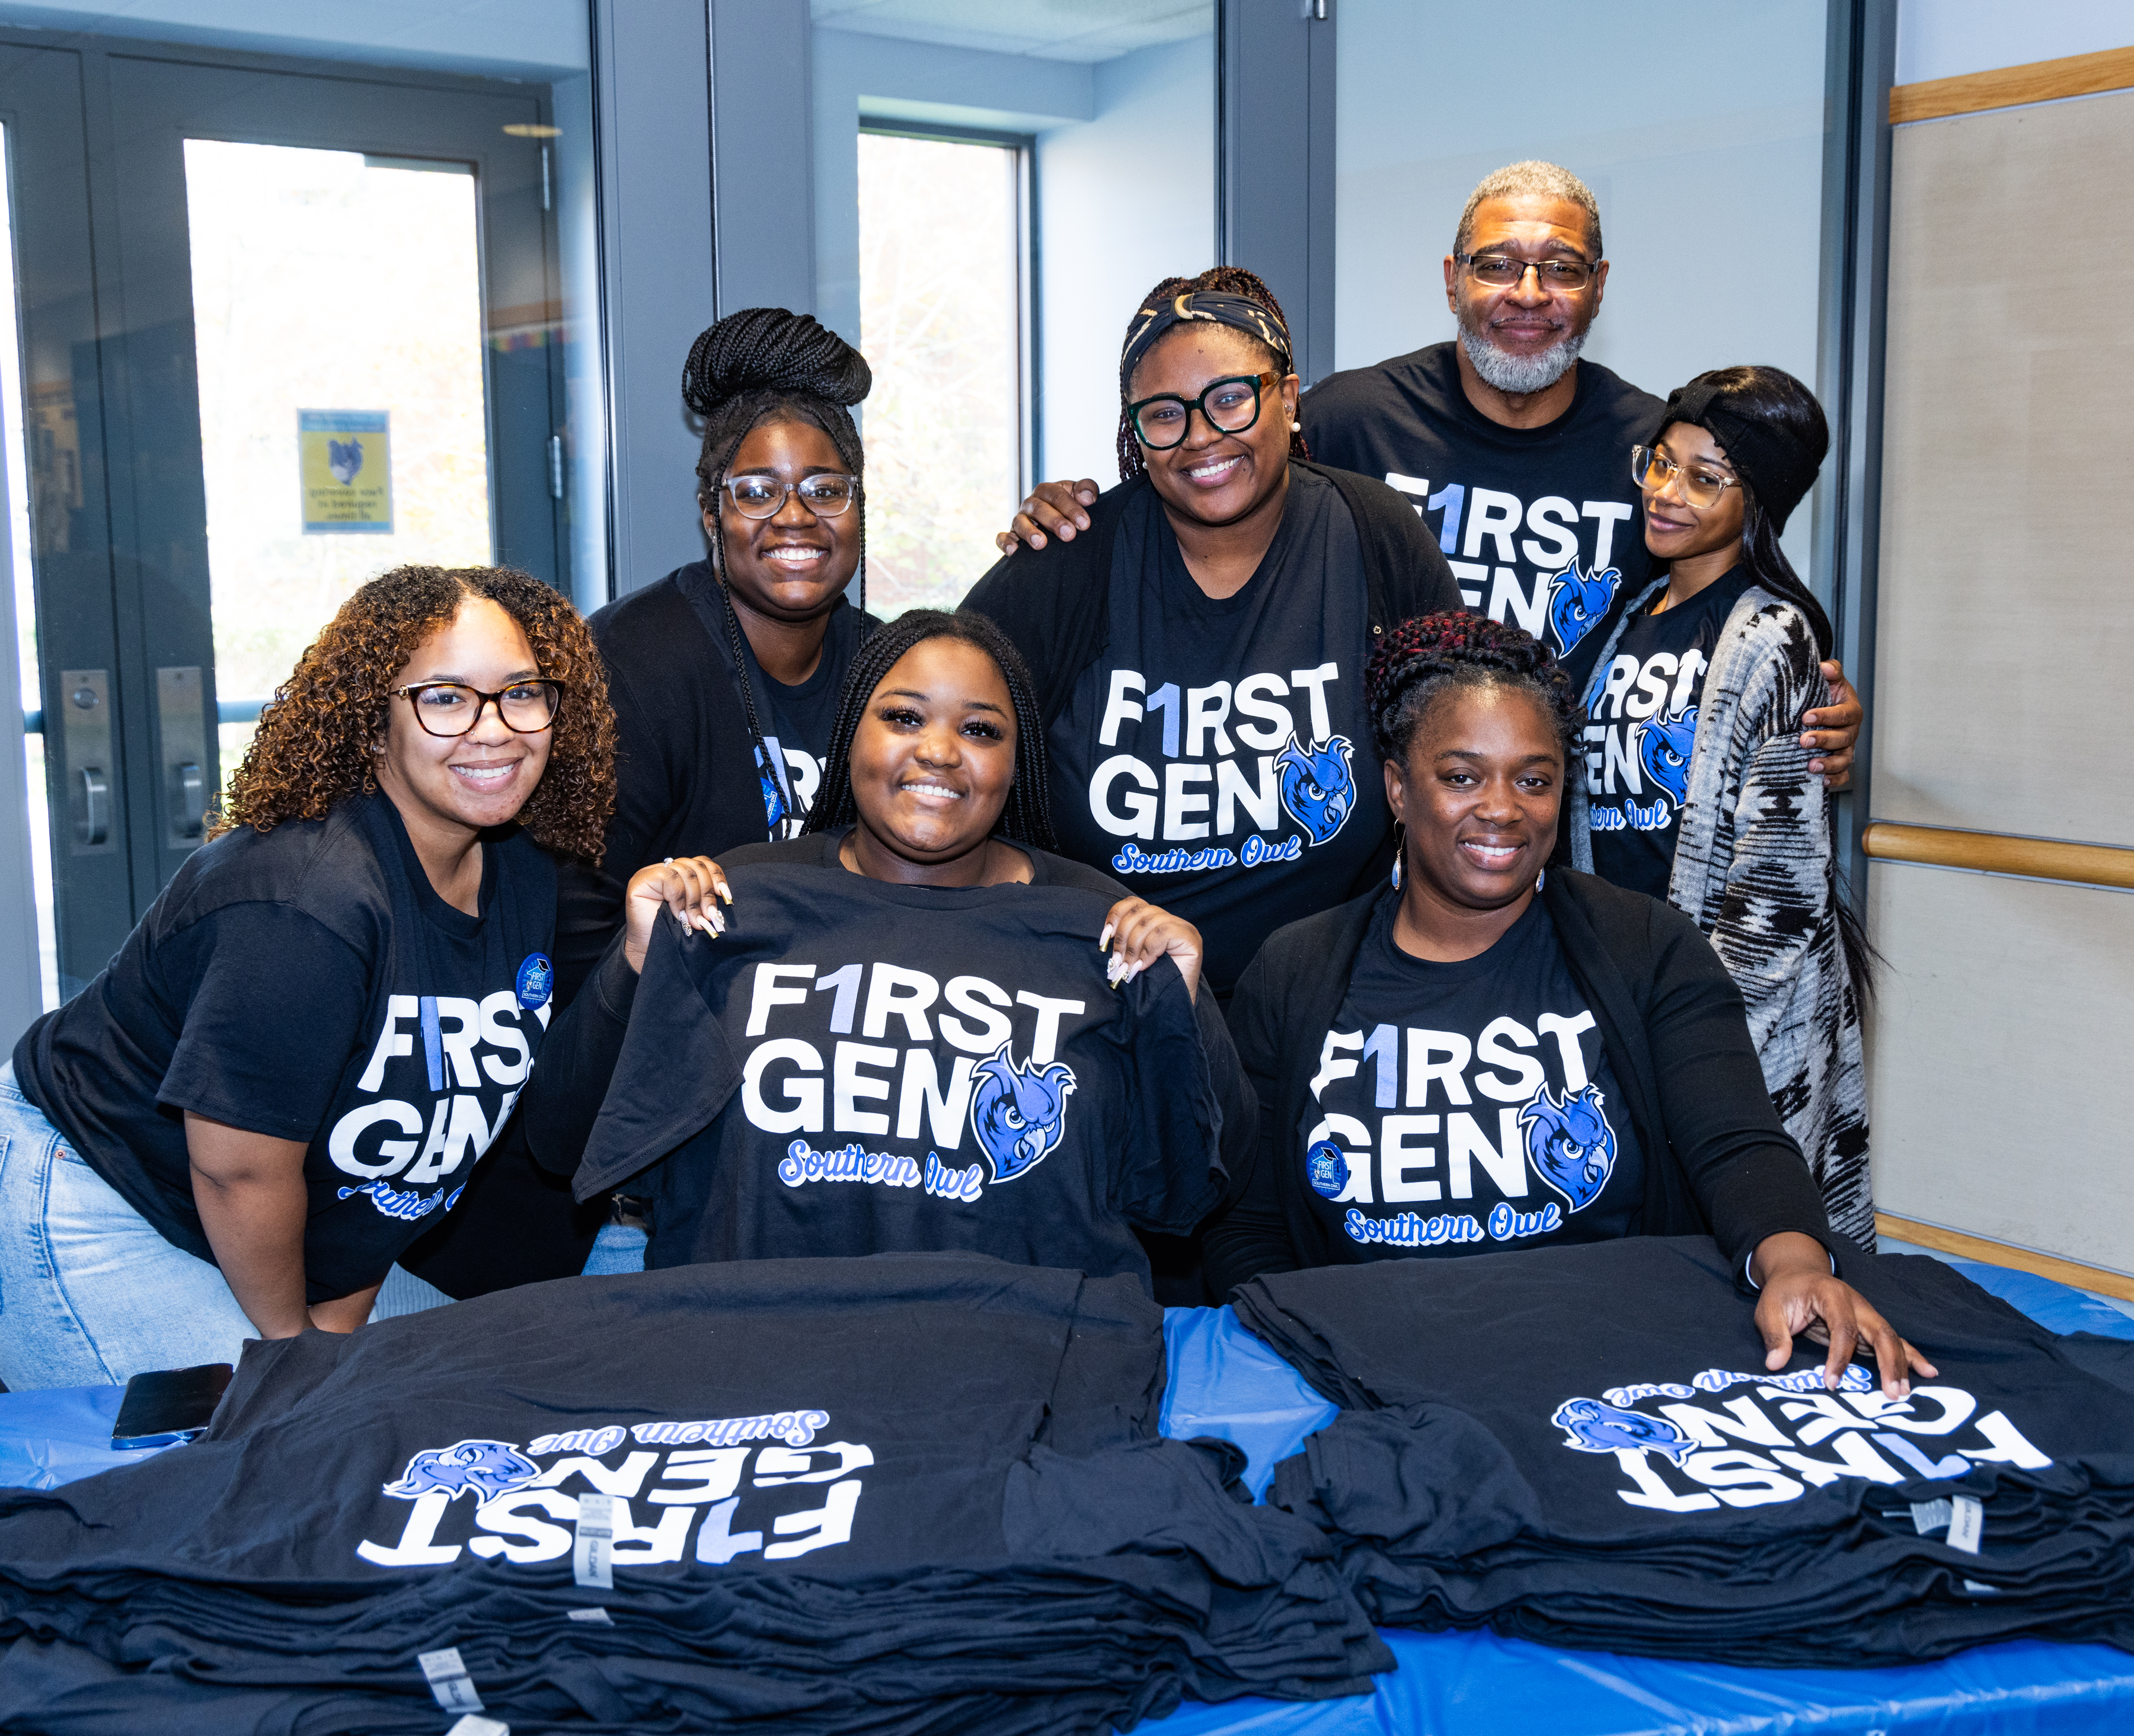 Southern Connecticut State University FgF student group